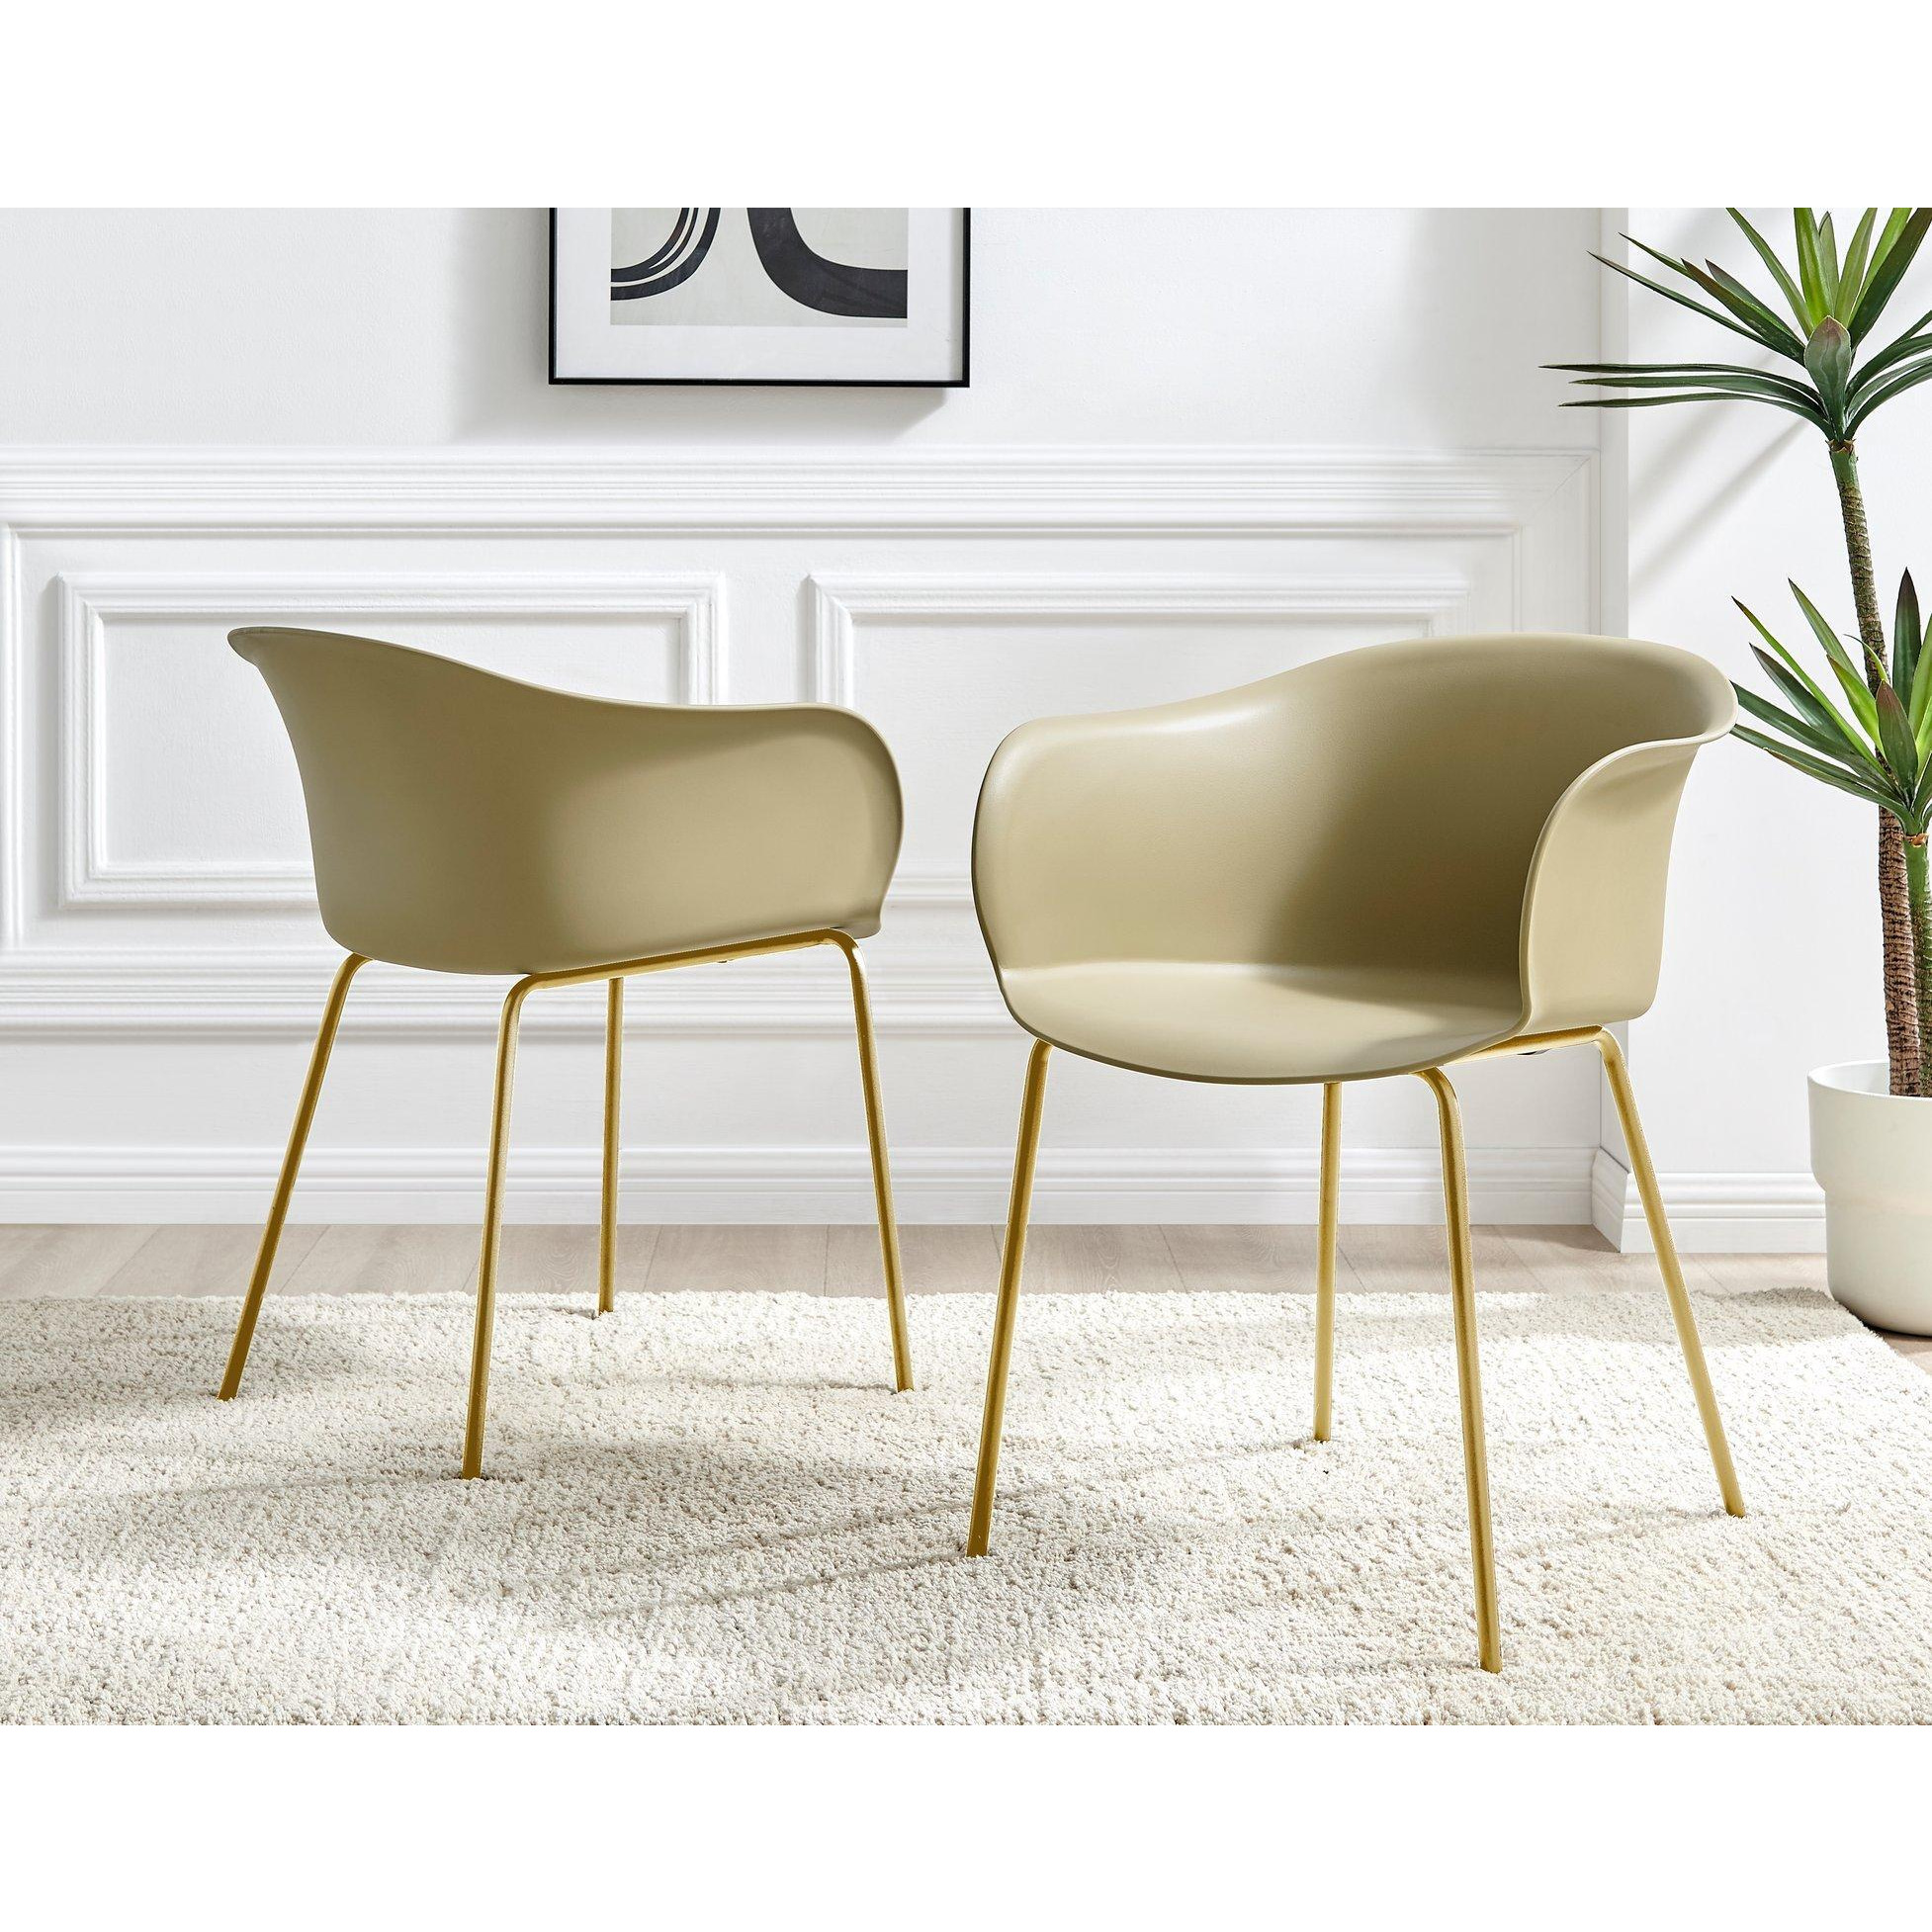 Set of 2 Harper Scandi Inspired Plastic 'Bat Chair' Dining Chairs With Gold Chrome Metal Legs - image 1